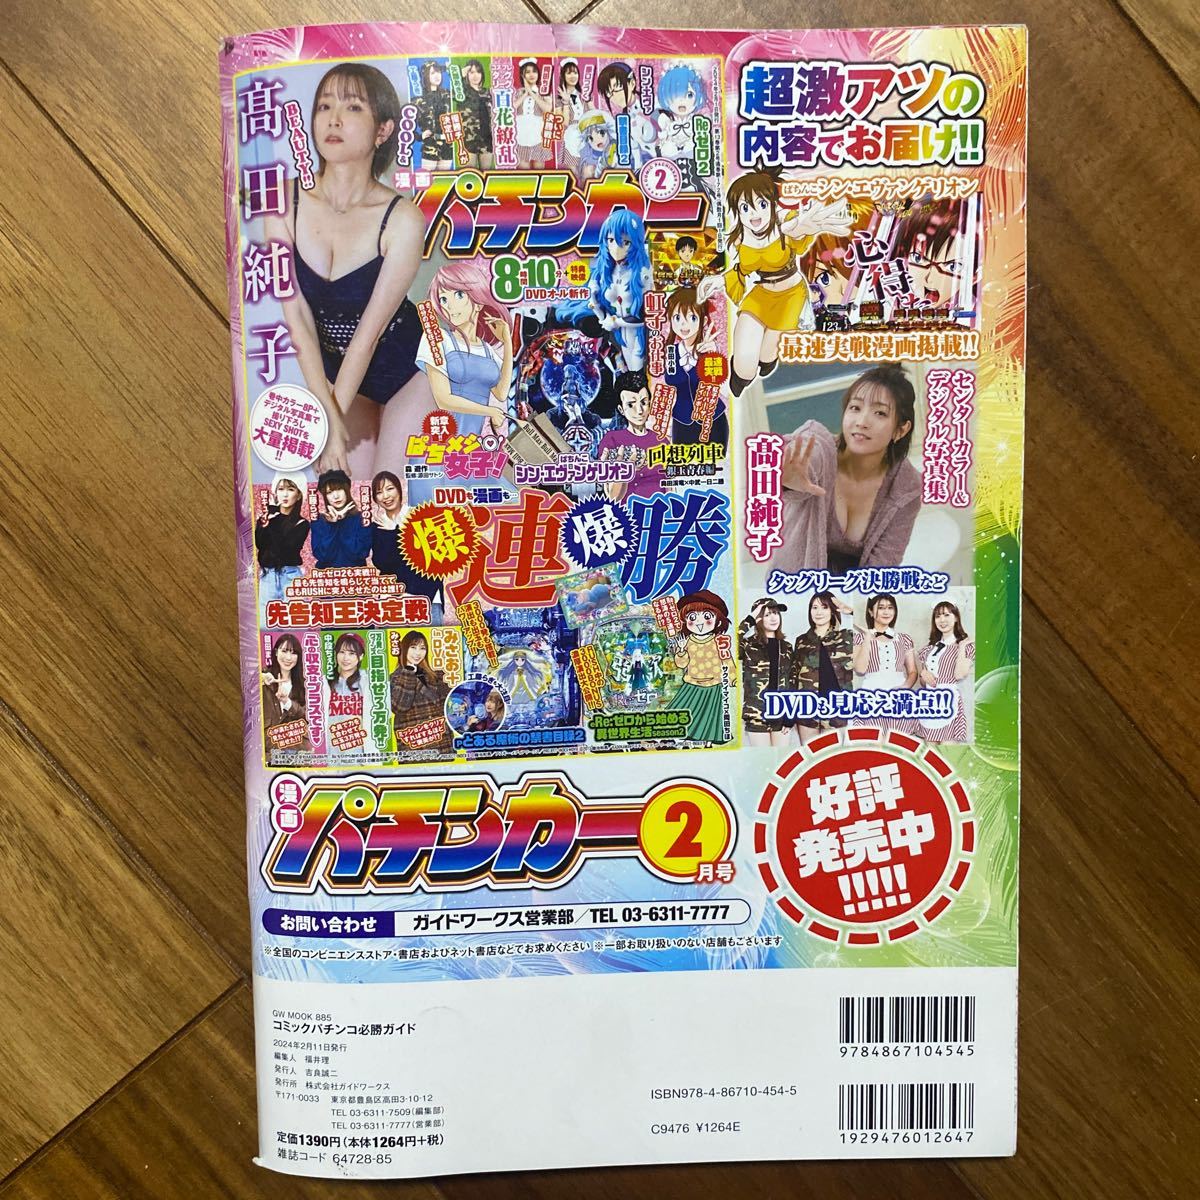  comics pachinko certainly . guide DVD less reverse side cover from 3 sheets crack have control number A755